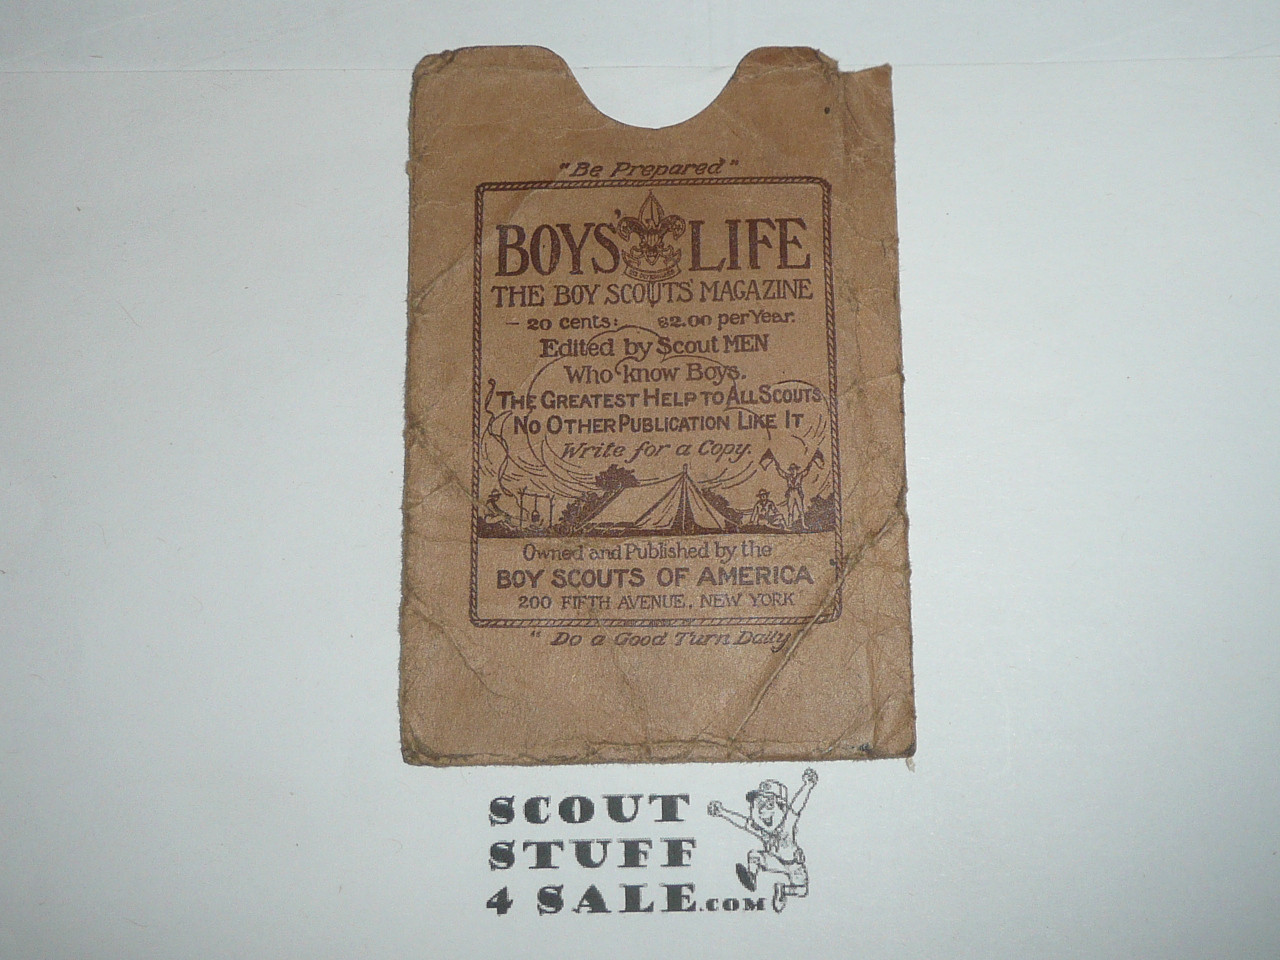 1929 Boy Scout Adult Membership Card, 3-fold, with the Envelope, 7 signatures, expires September 1929, BSMC217